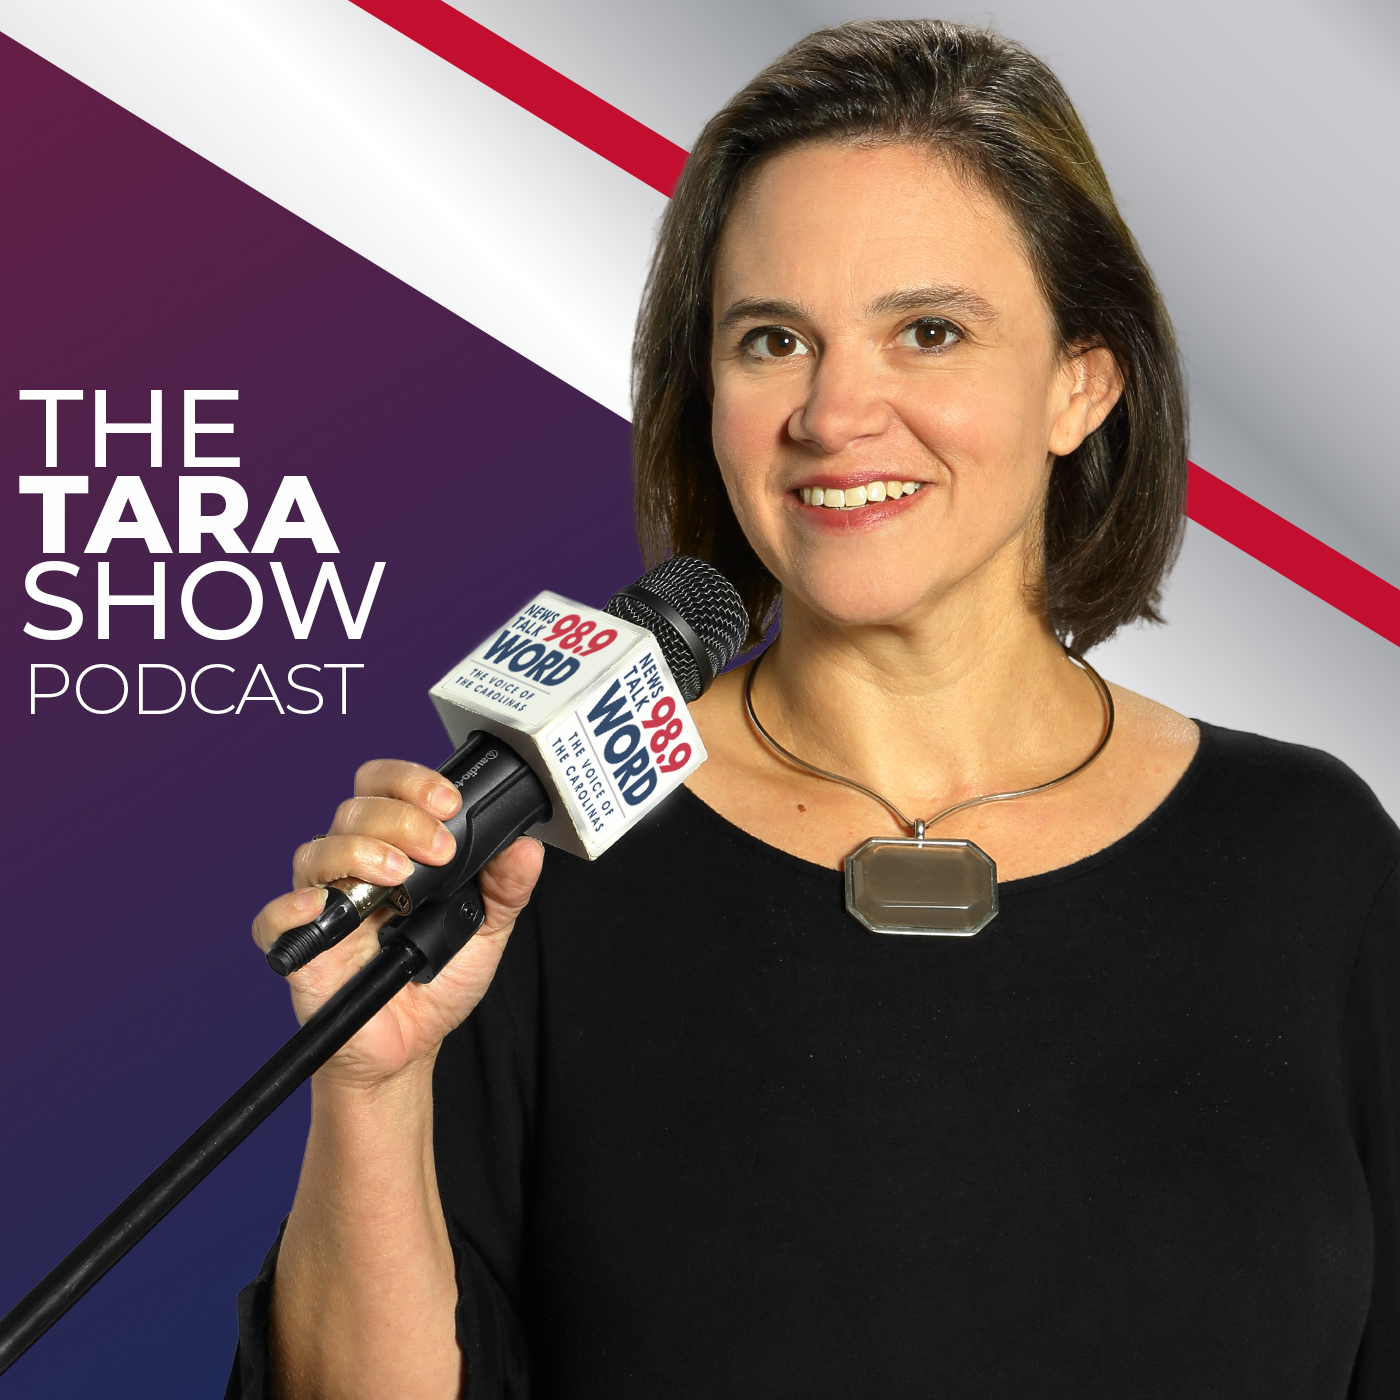 Hour 4: The Tara Show - “Merrick Garland Claims Duel System of Justice” “The God of Government” “Cost is STILL Rising” “Americans Replaced by Immigrants” 